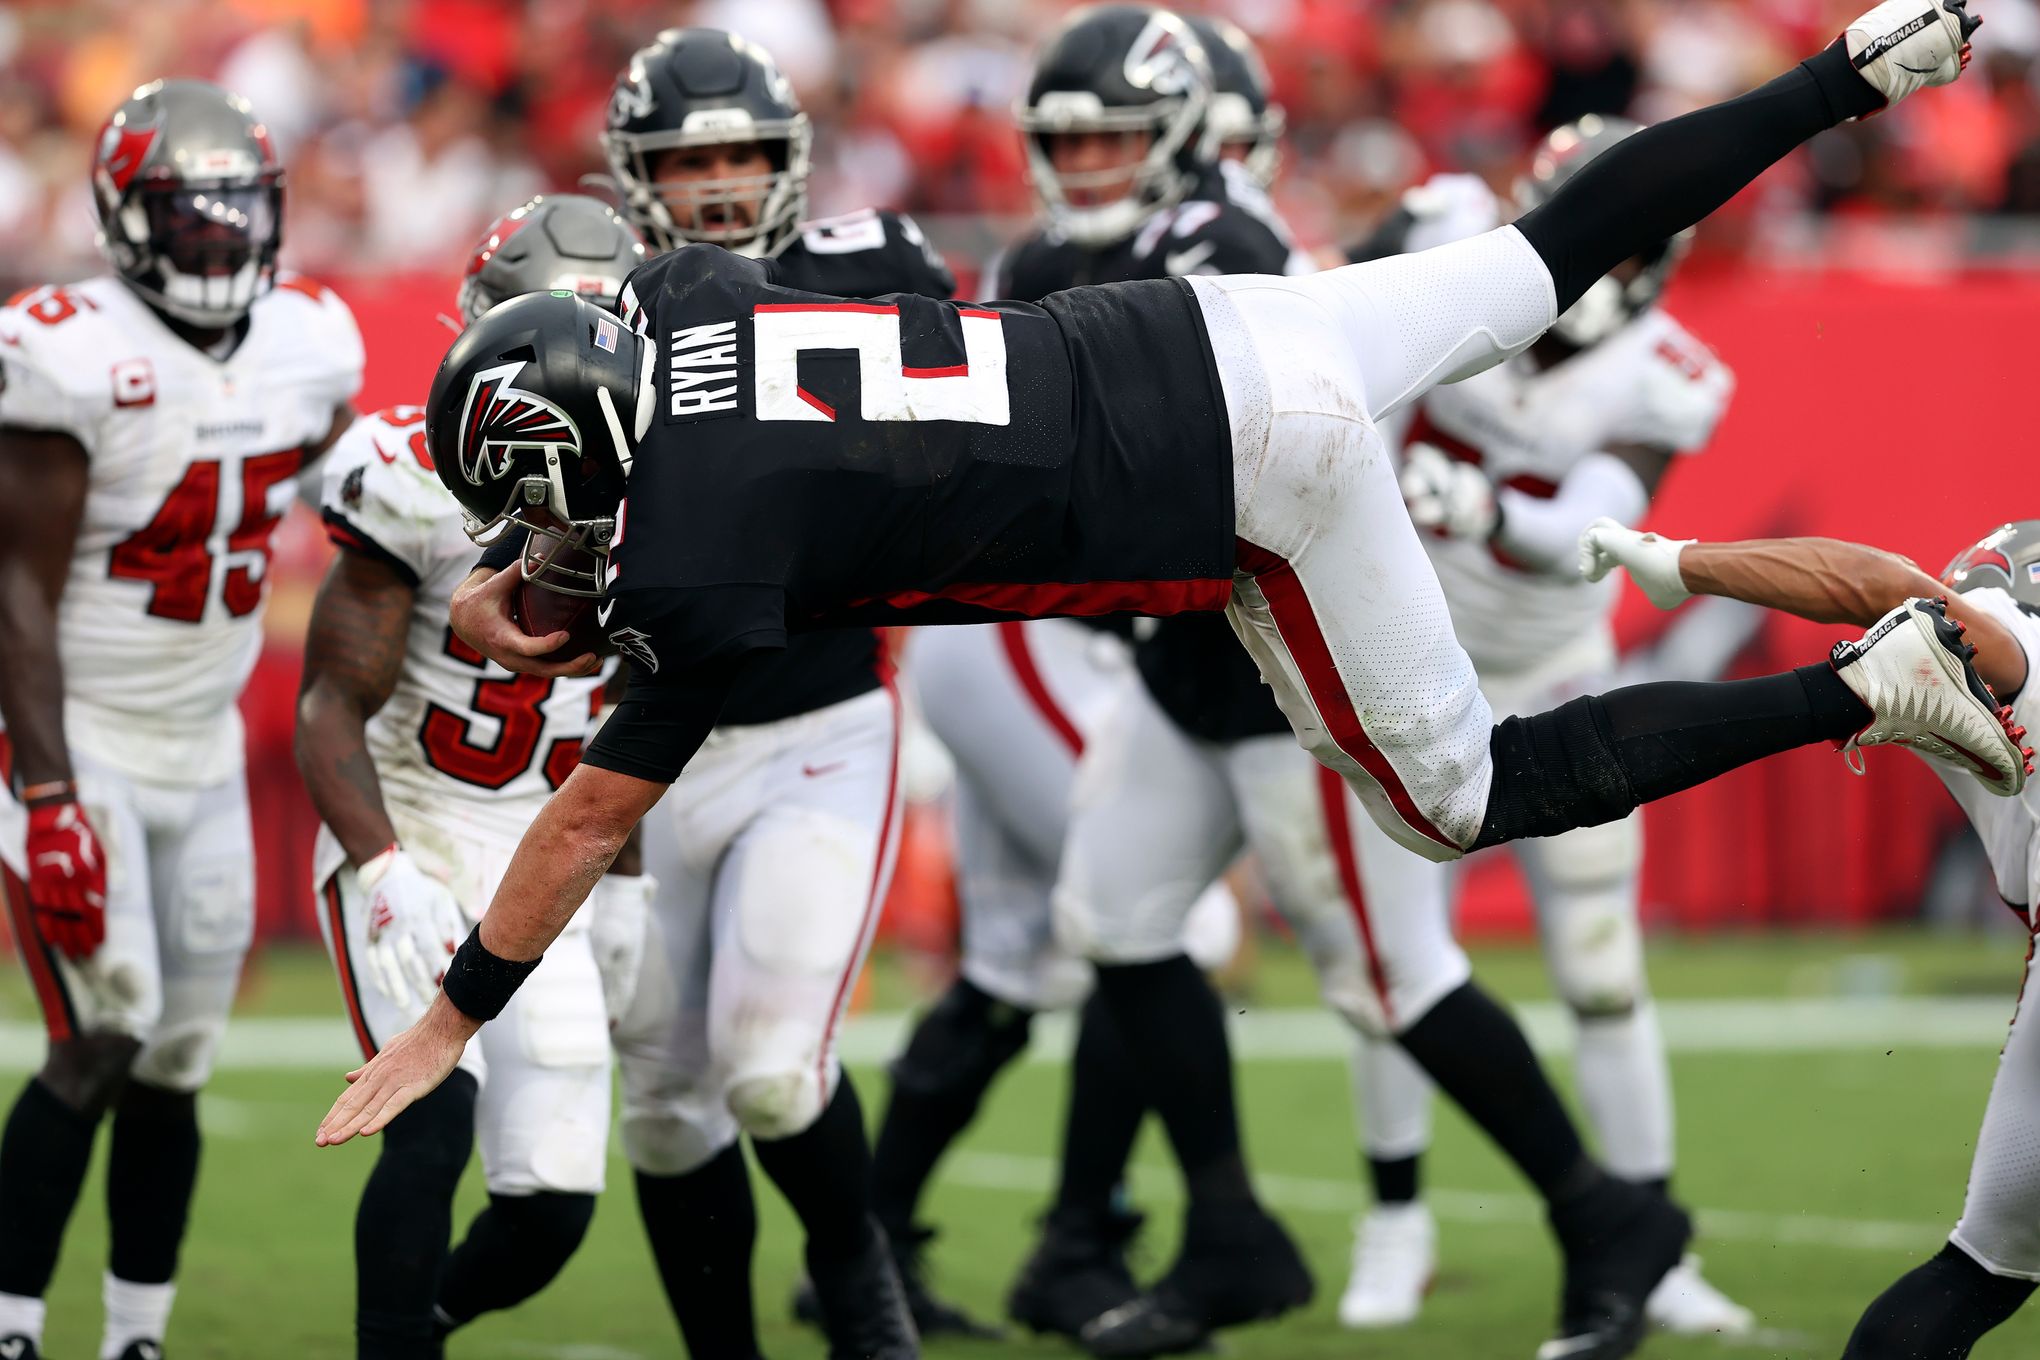 Falcons defeat Browns: 11 key stats from Sunday's 23-20 win